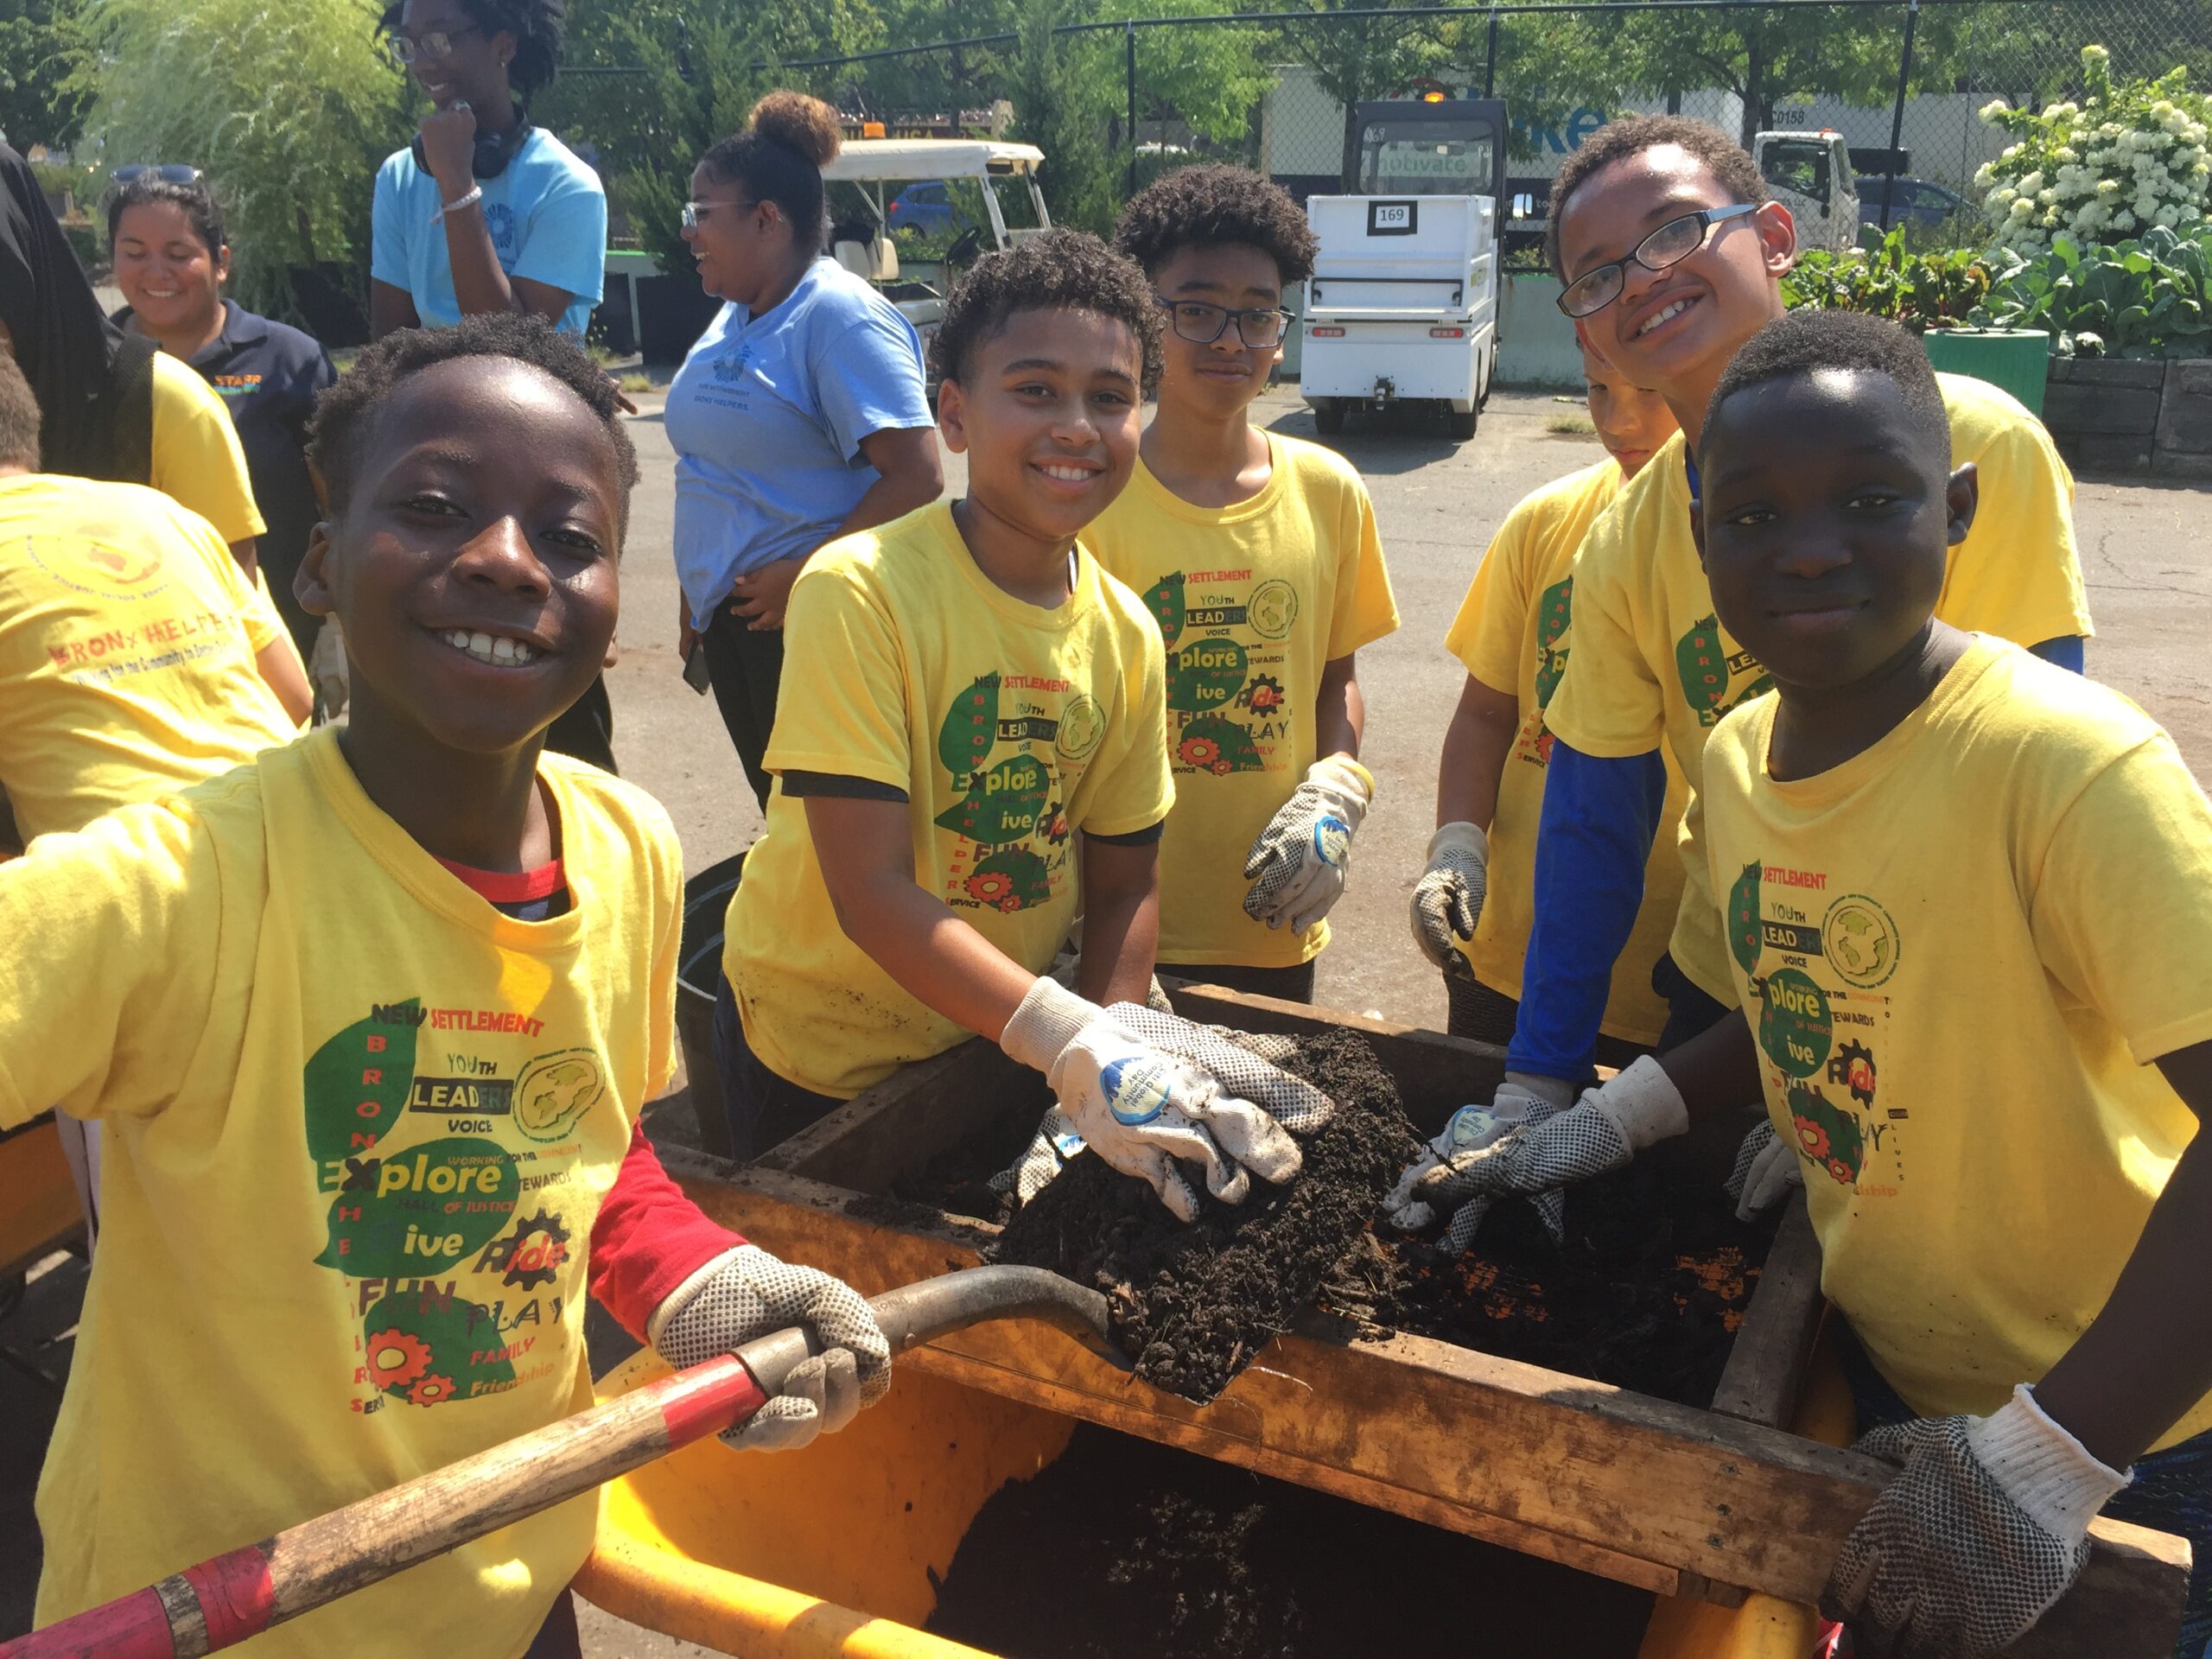 A group of six students volunteering with Hudson River Park's Community Compost program, shoveling compost into a wheelbarrow.